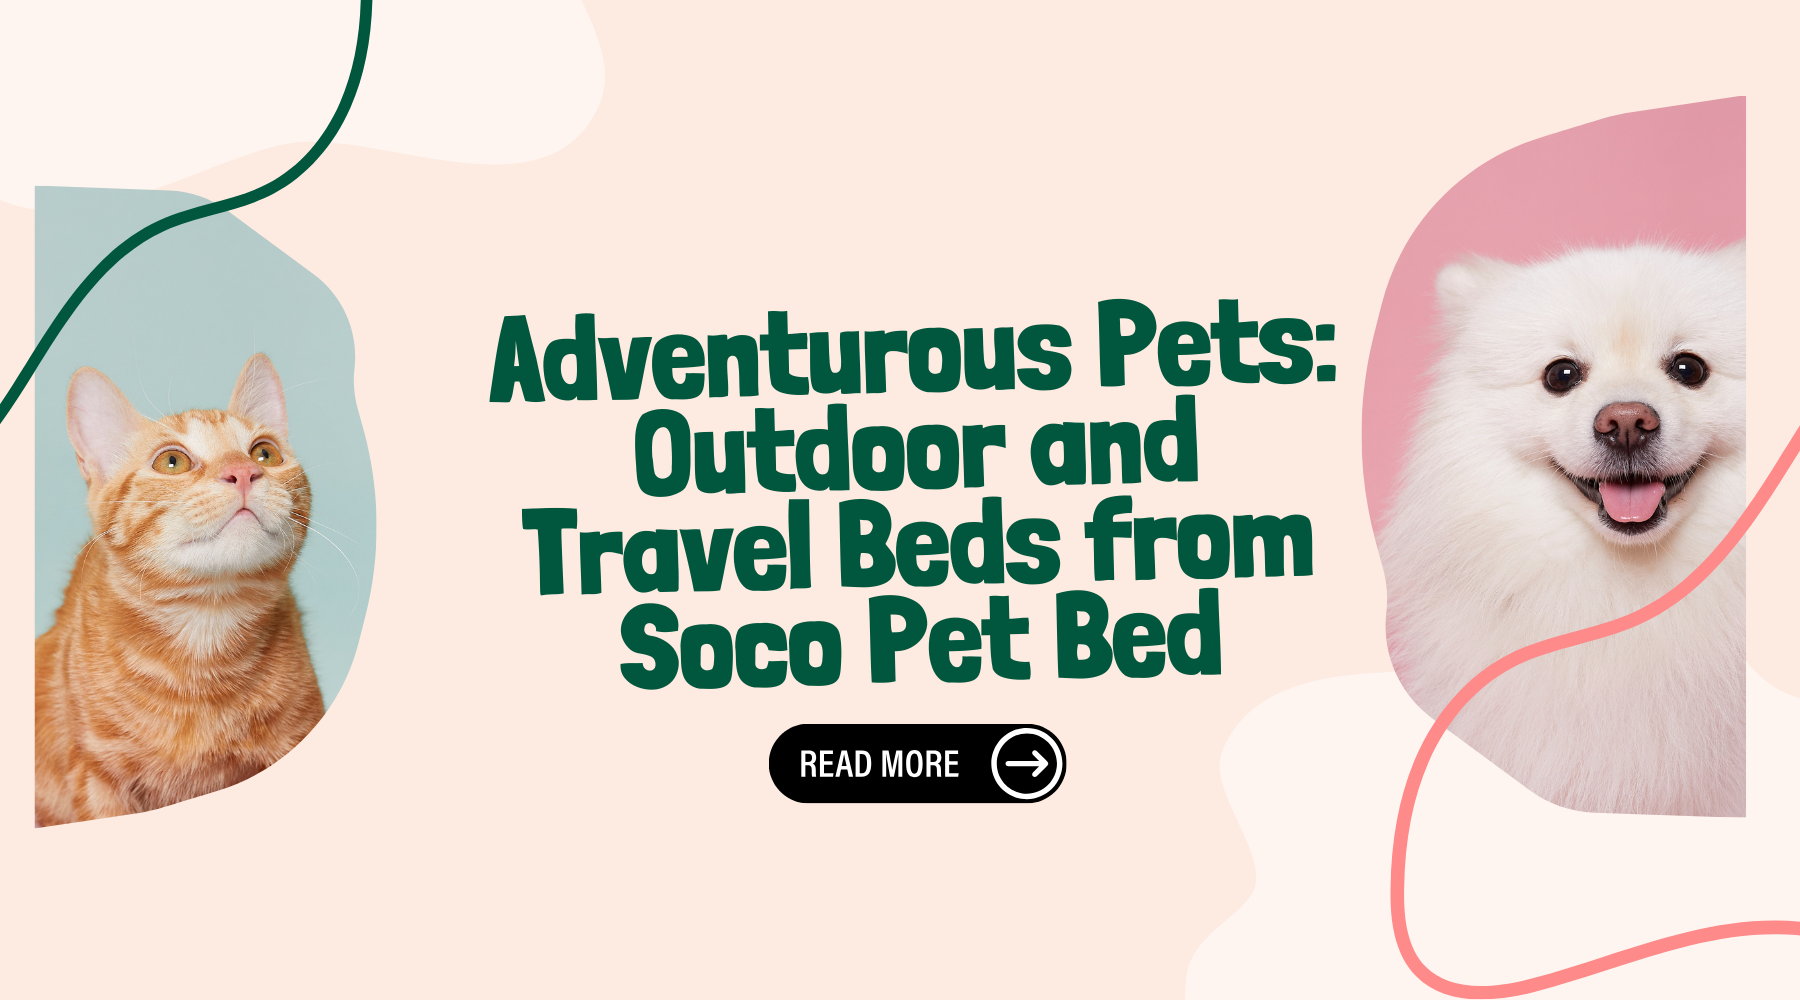 Adventurous Pets: Outdoor and Travel Beds from Soco Pet Bed